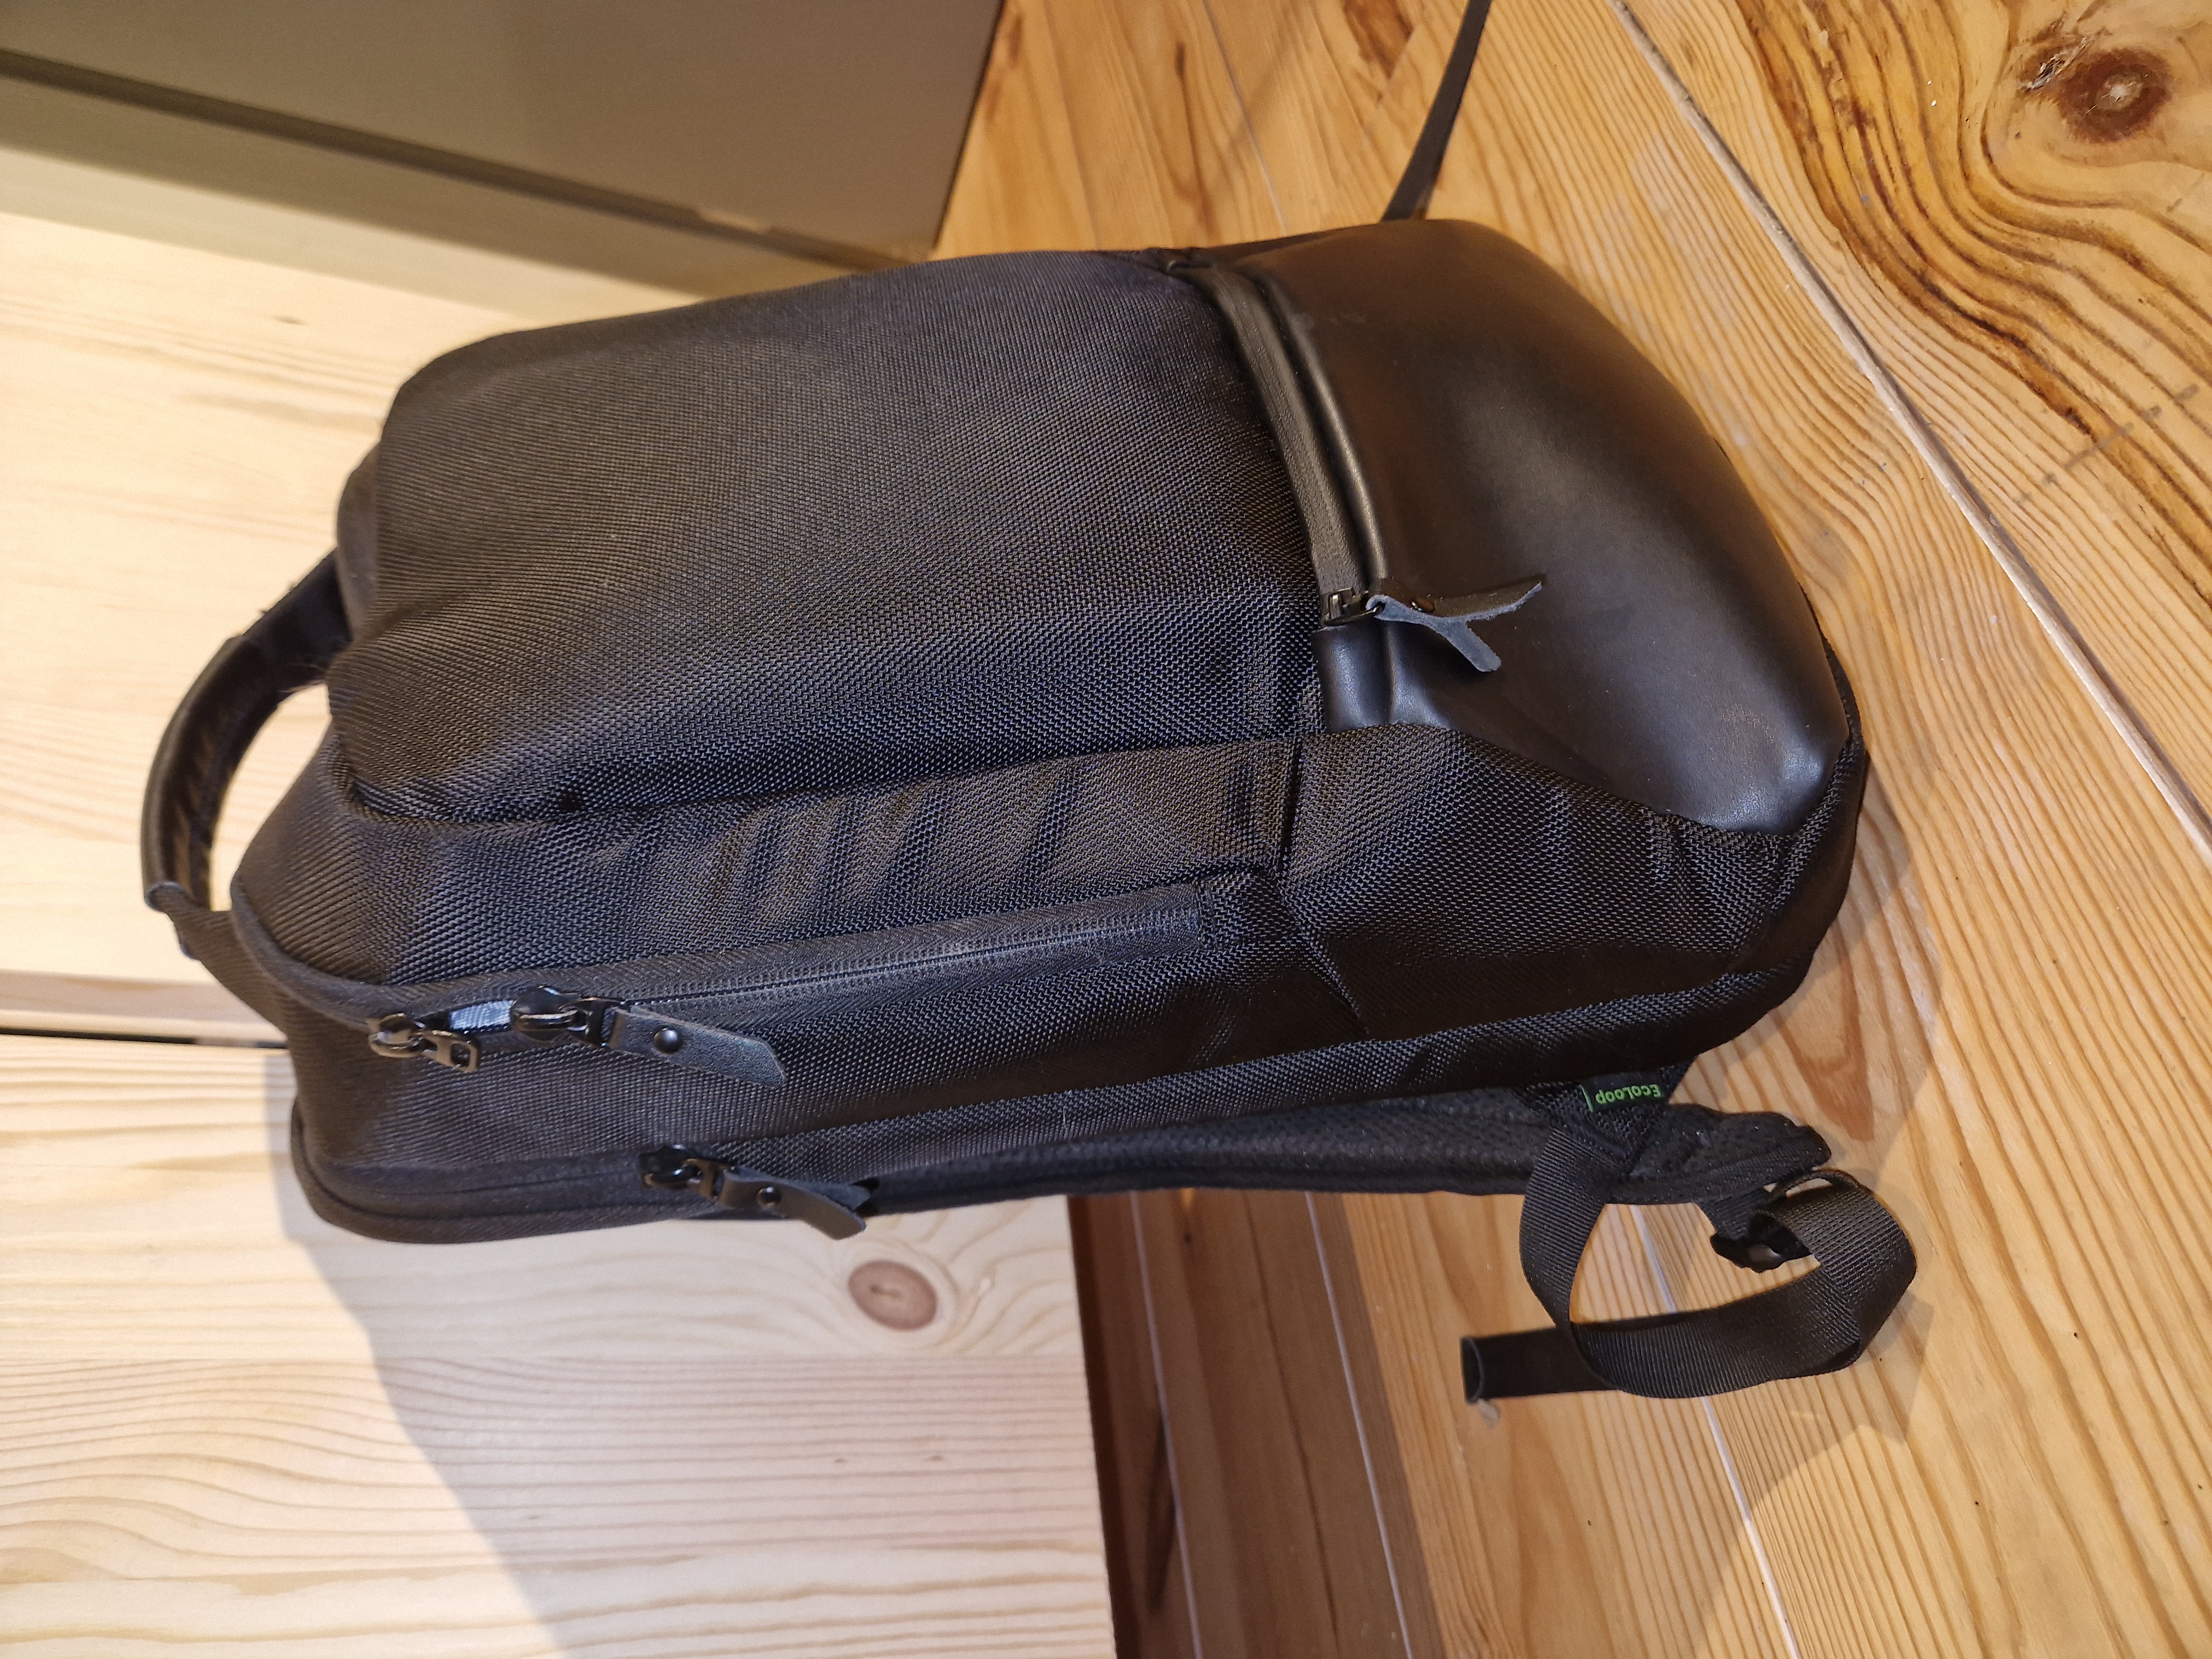 Picture of Dell EcoLoop Premier backpack after one year of use